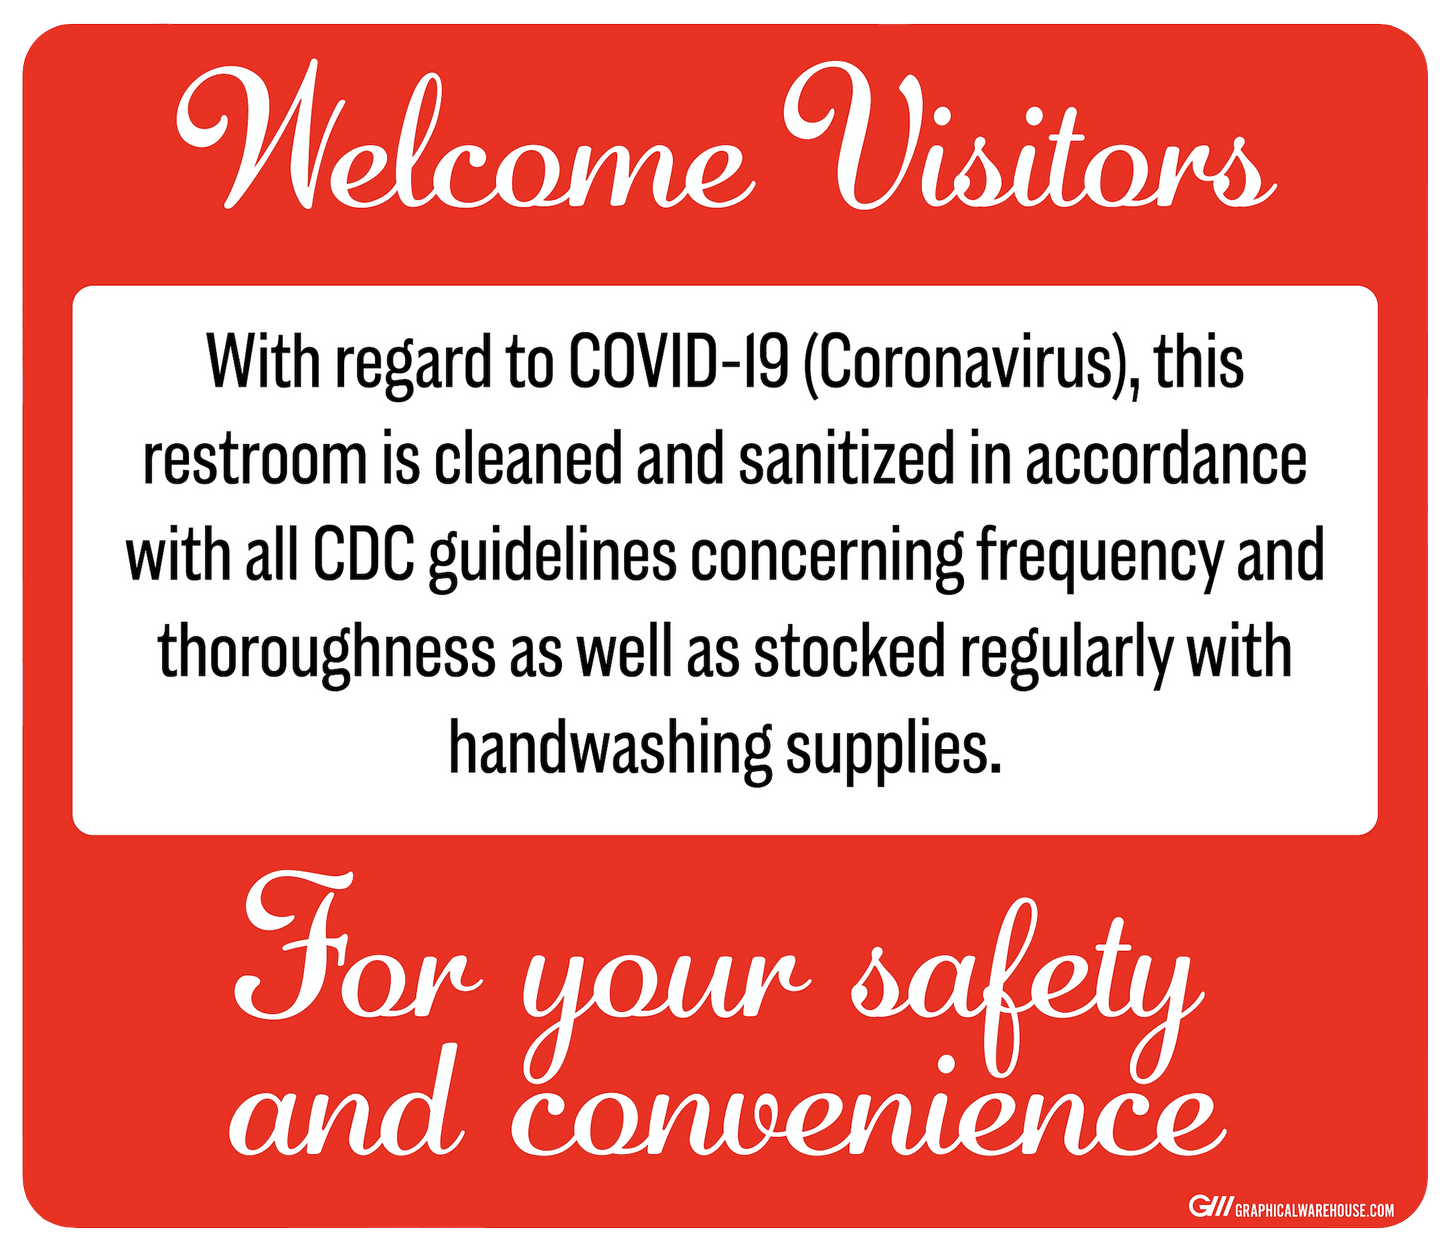 "Restroom Cleaned and Sanitized" Adhesive Durable Vinyl Decal- Various Sizes/Colors Available